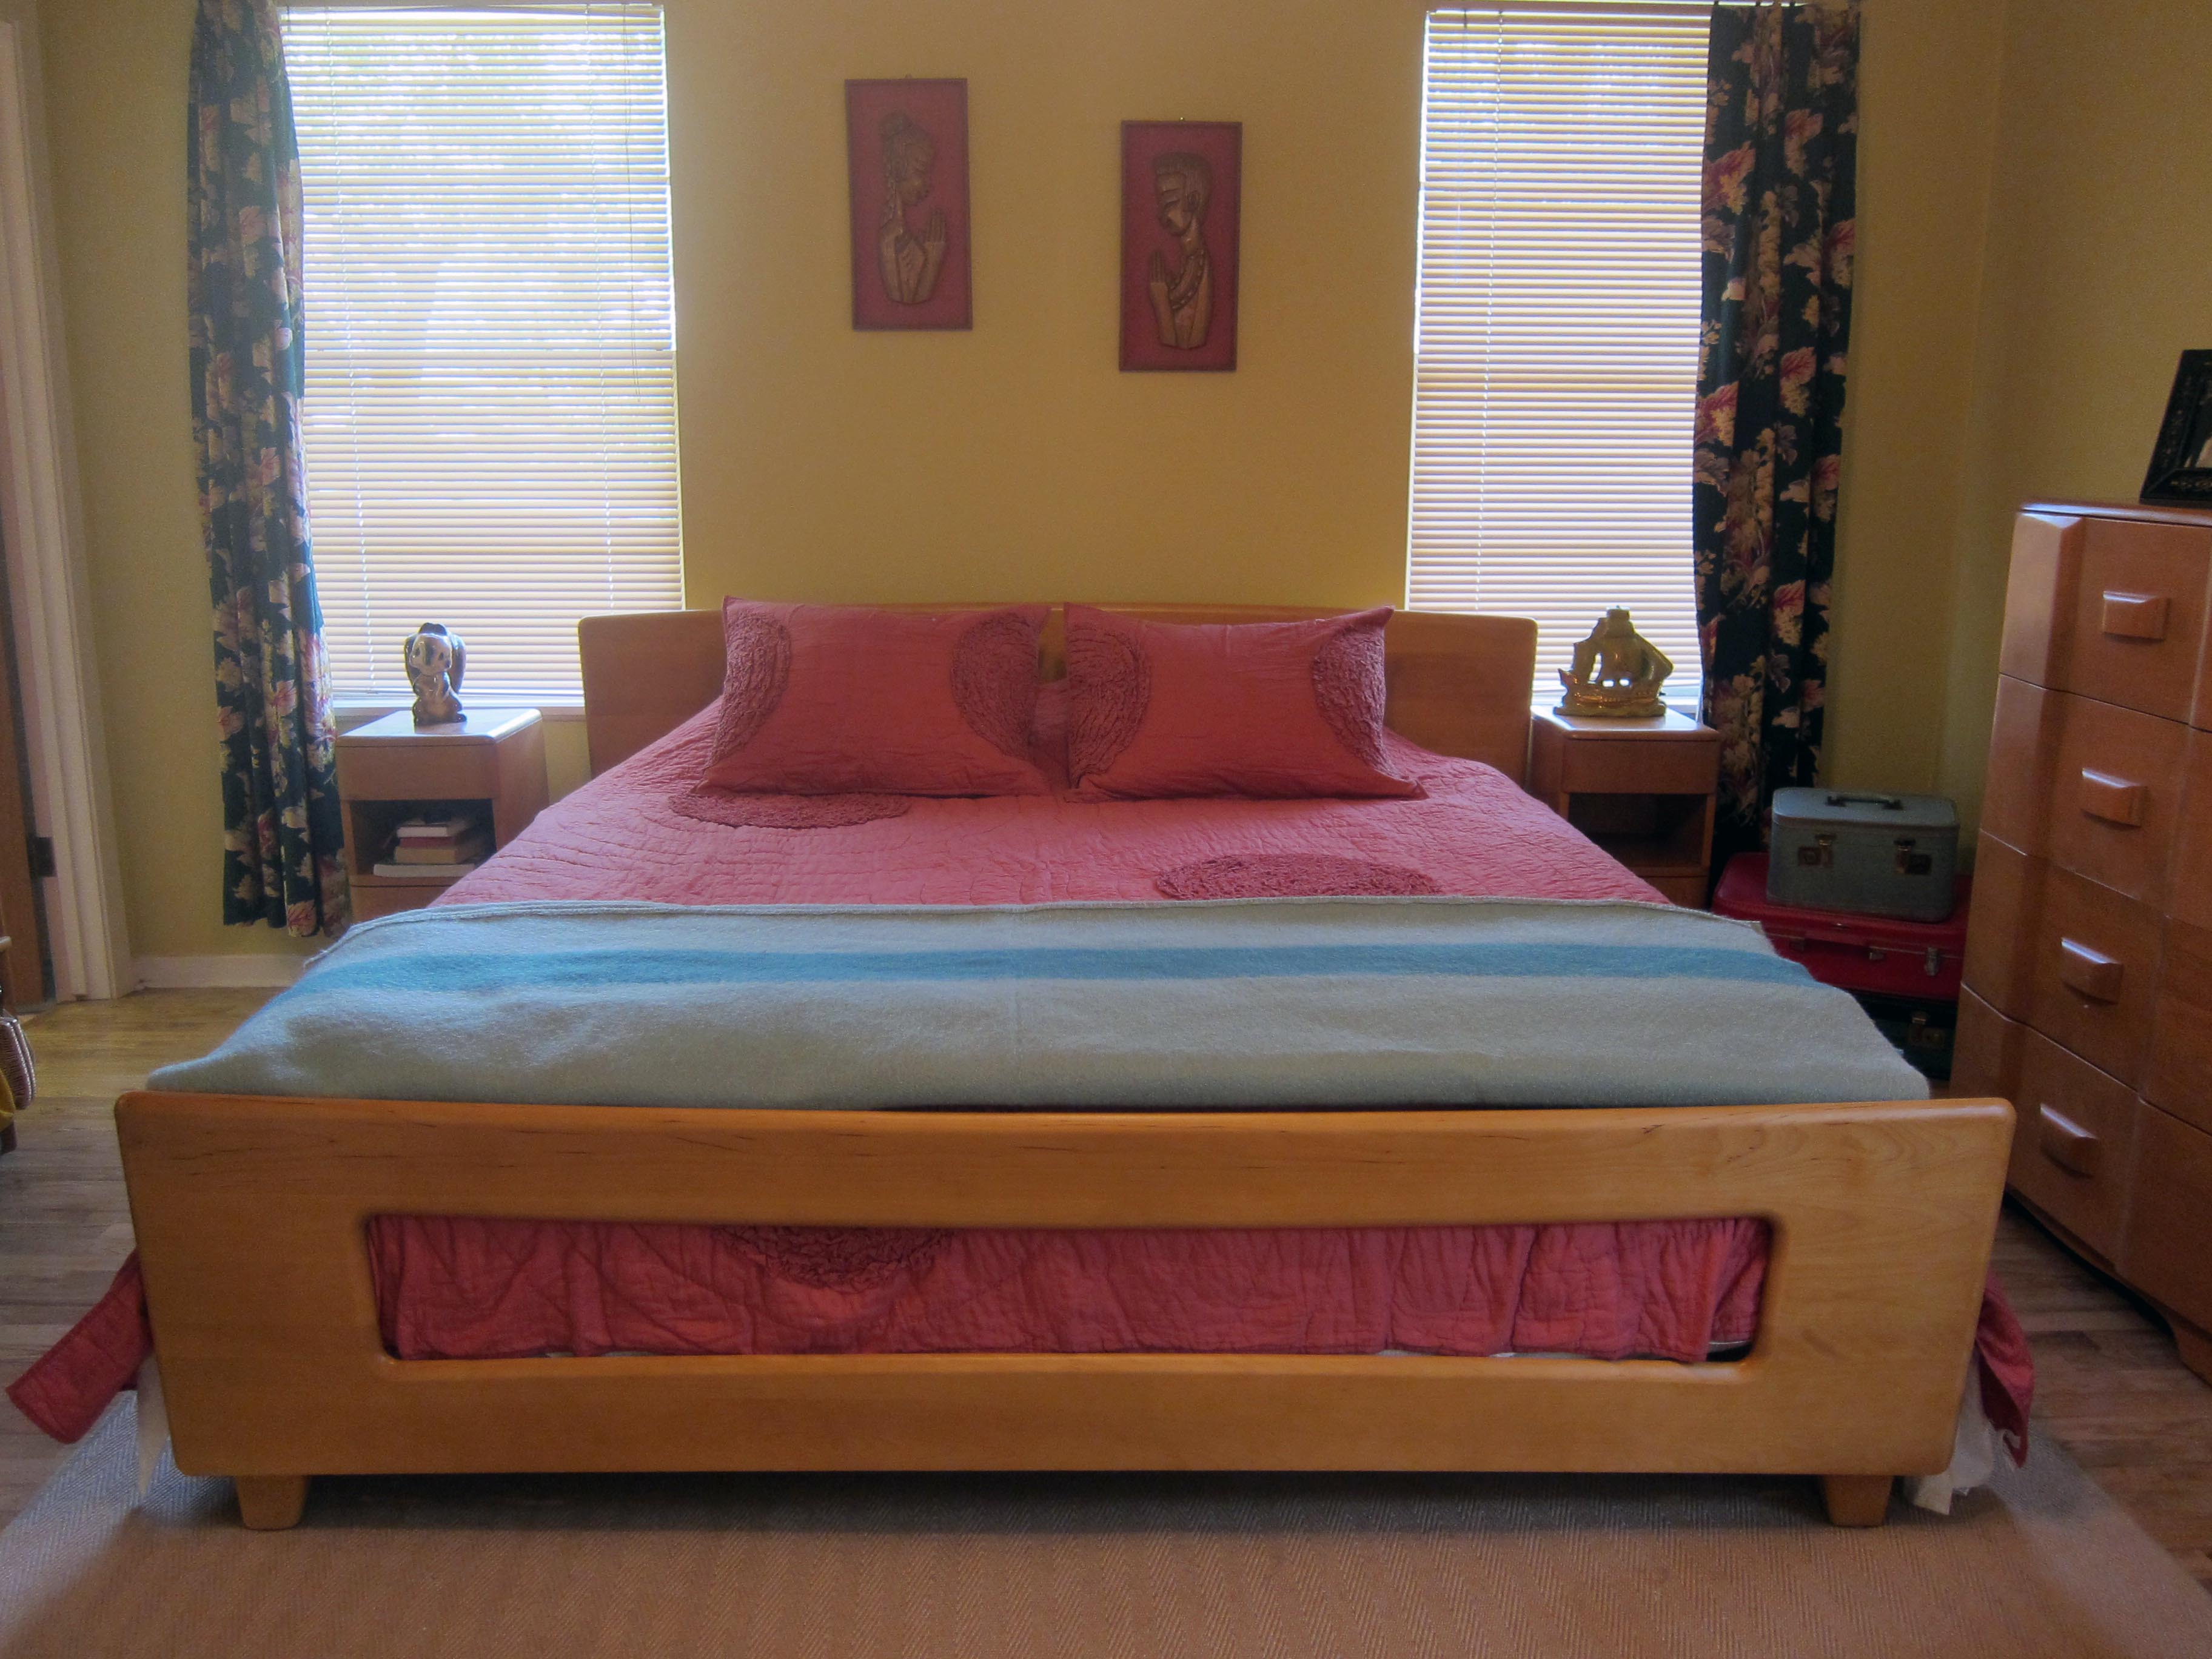 Bed Betty Crafter, Heywood Wakefield King Bed